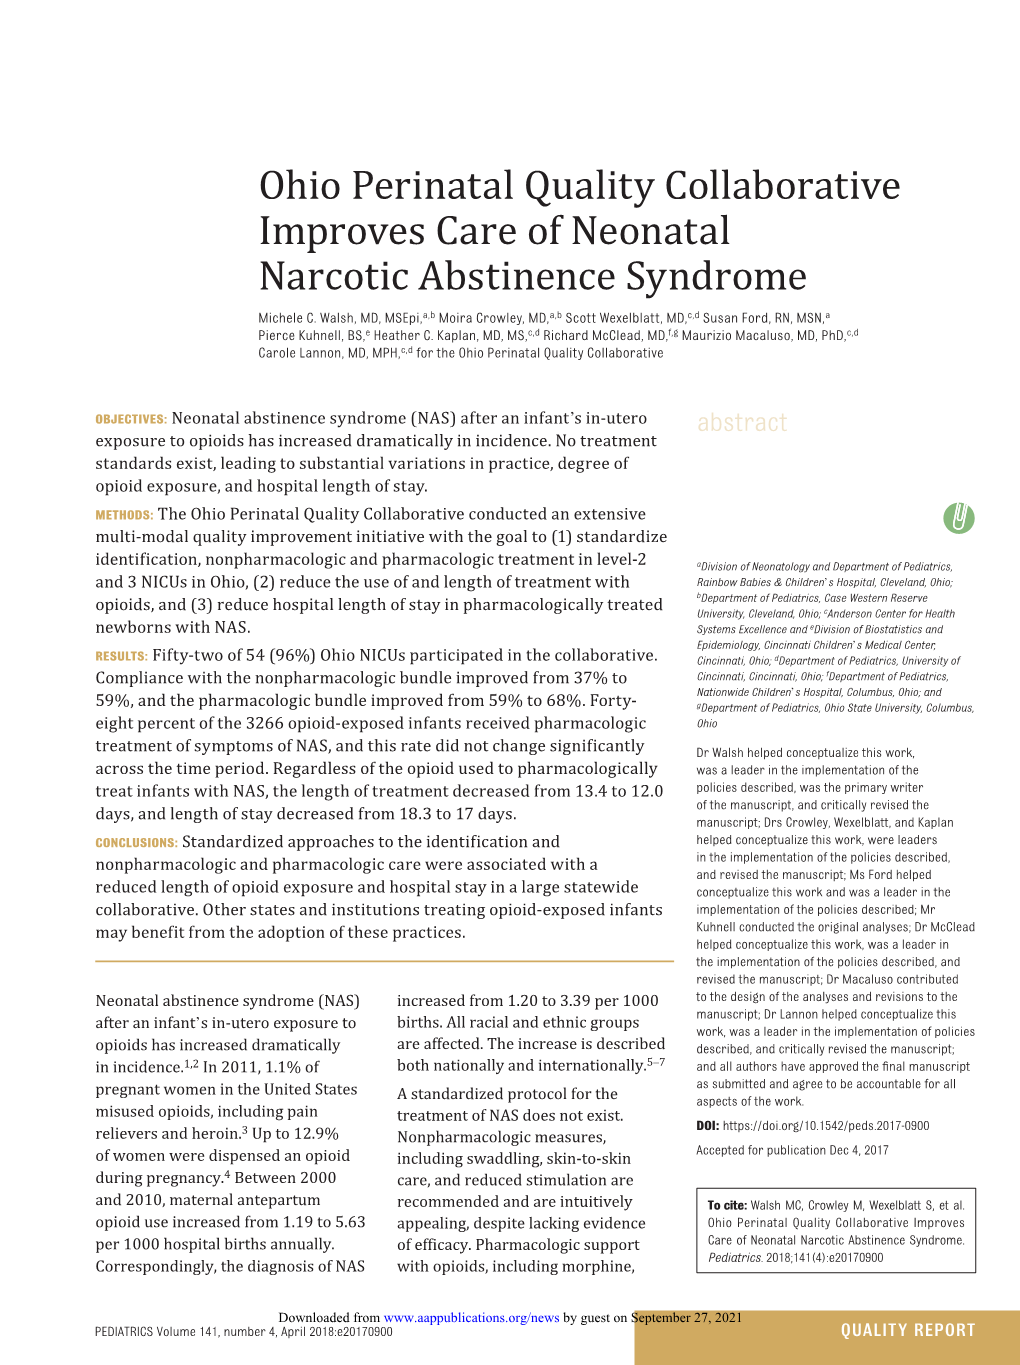 Ohio Perinatal Quality Collaborative Improves Care of Neonatal Narcotic Abstinence Syndrome Michele C